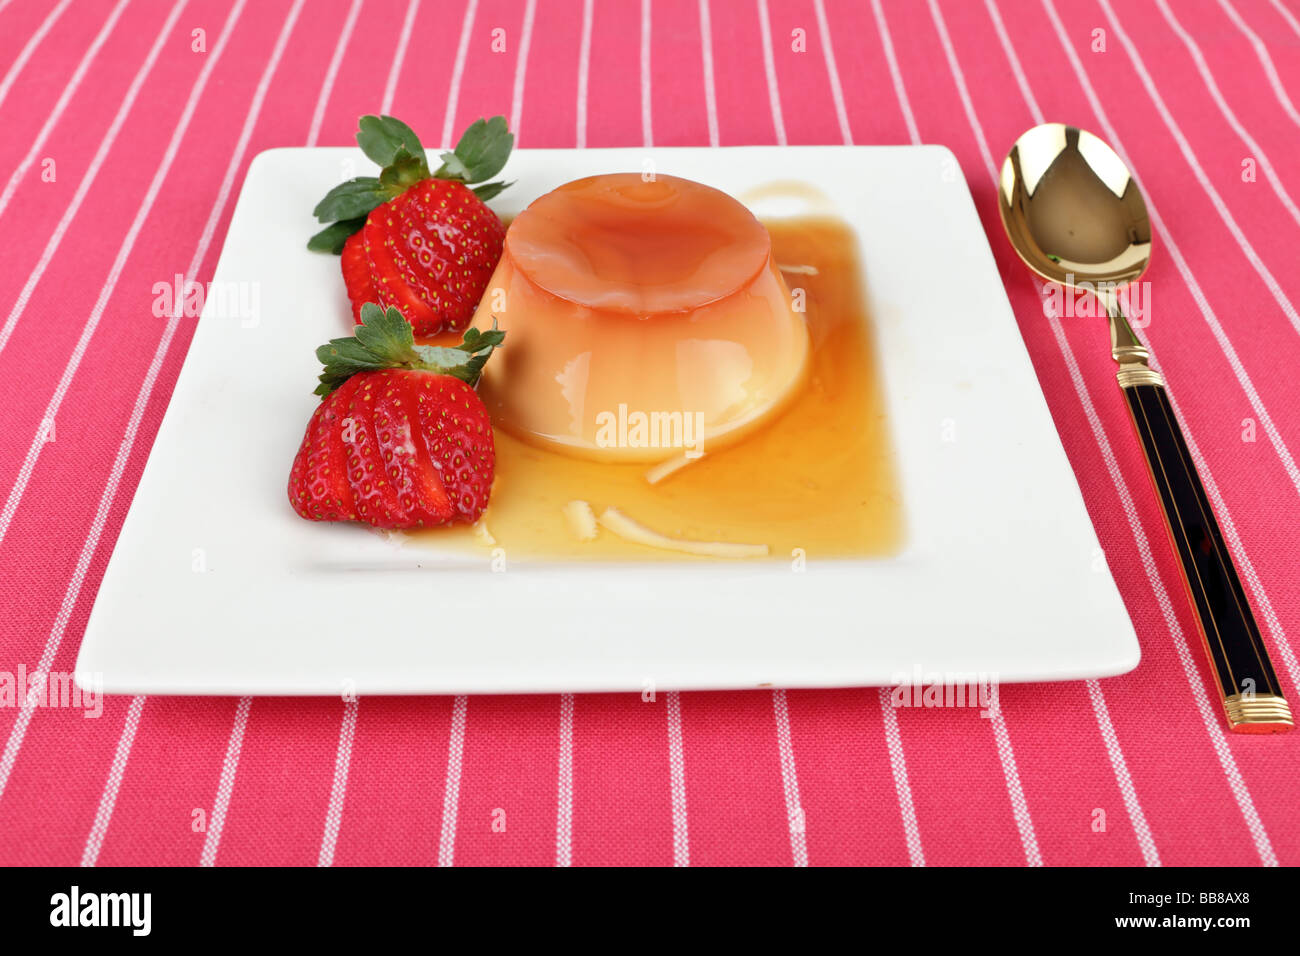 Creme caramel dessert with strawberries on aplate with spoon Stock Photo